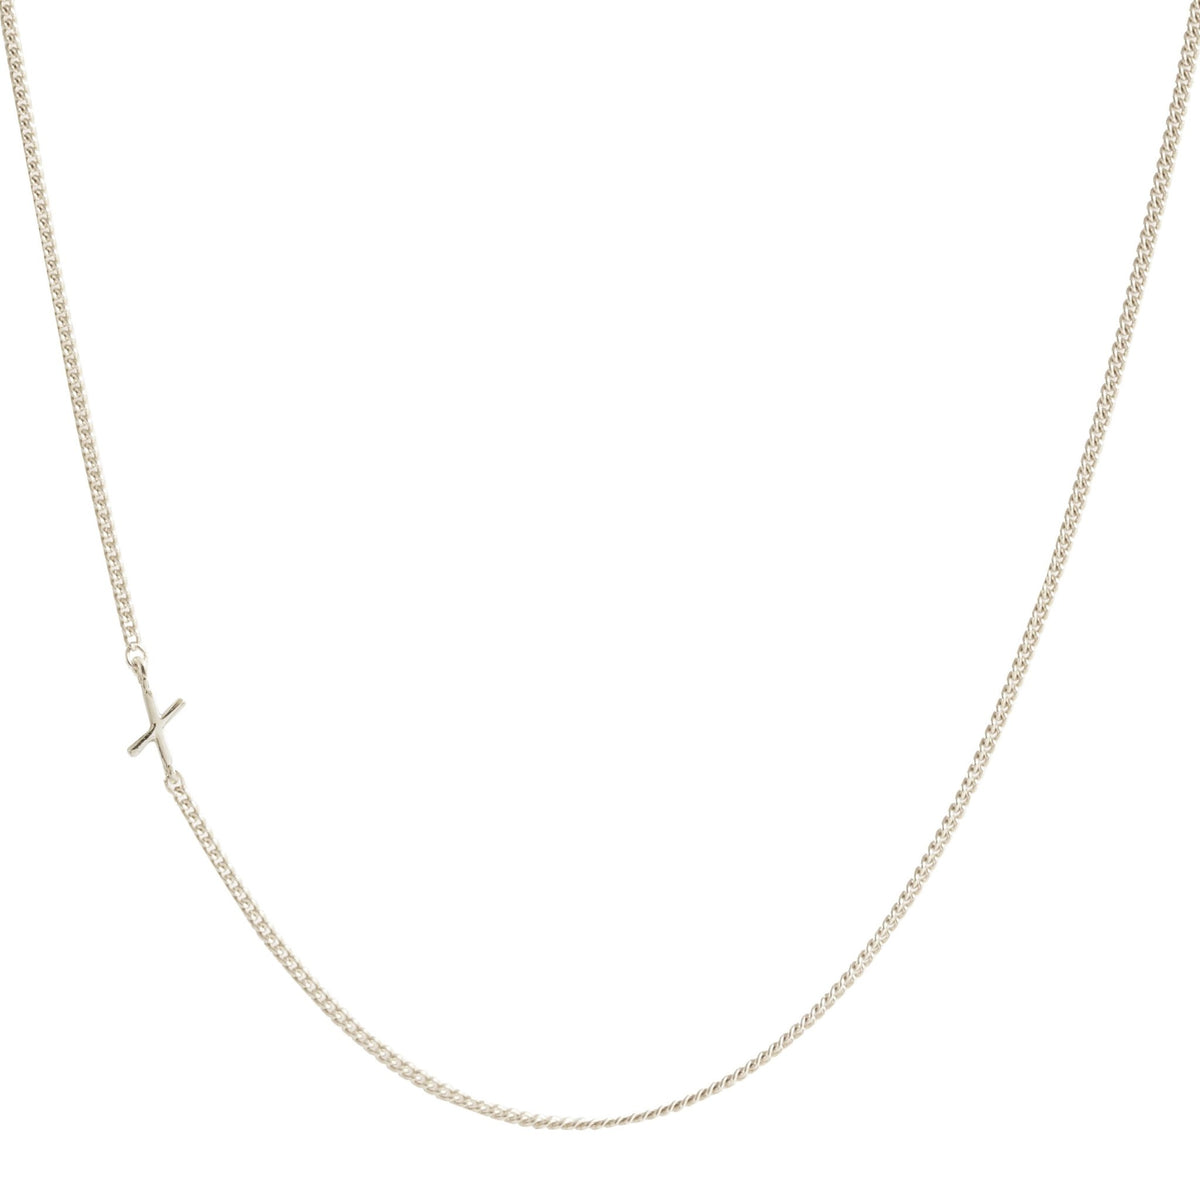 NOTABLE OFFSET INITIAL NECKLACE - X - GOLD, ROSE GOLD, OR SILVER - SO PRETTY CARA COTTER